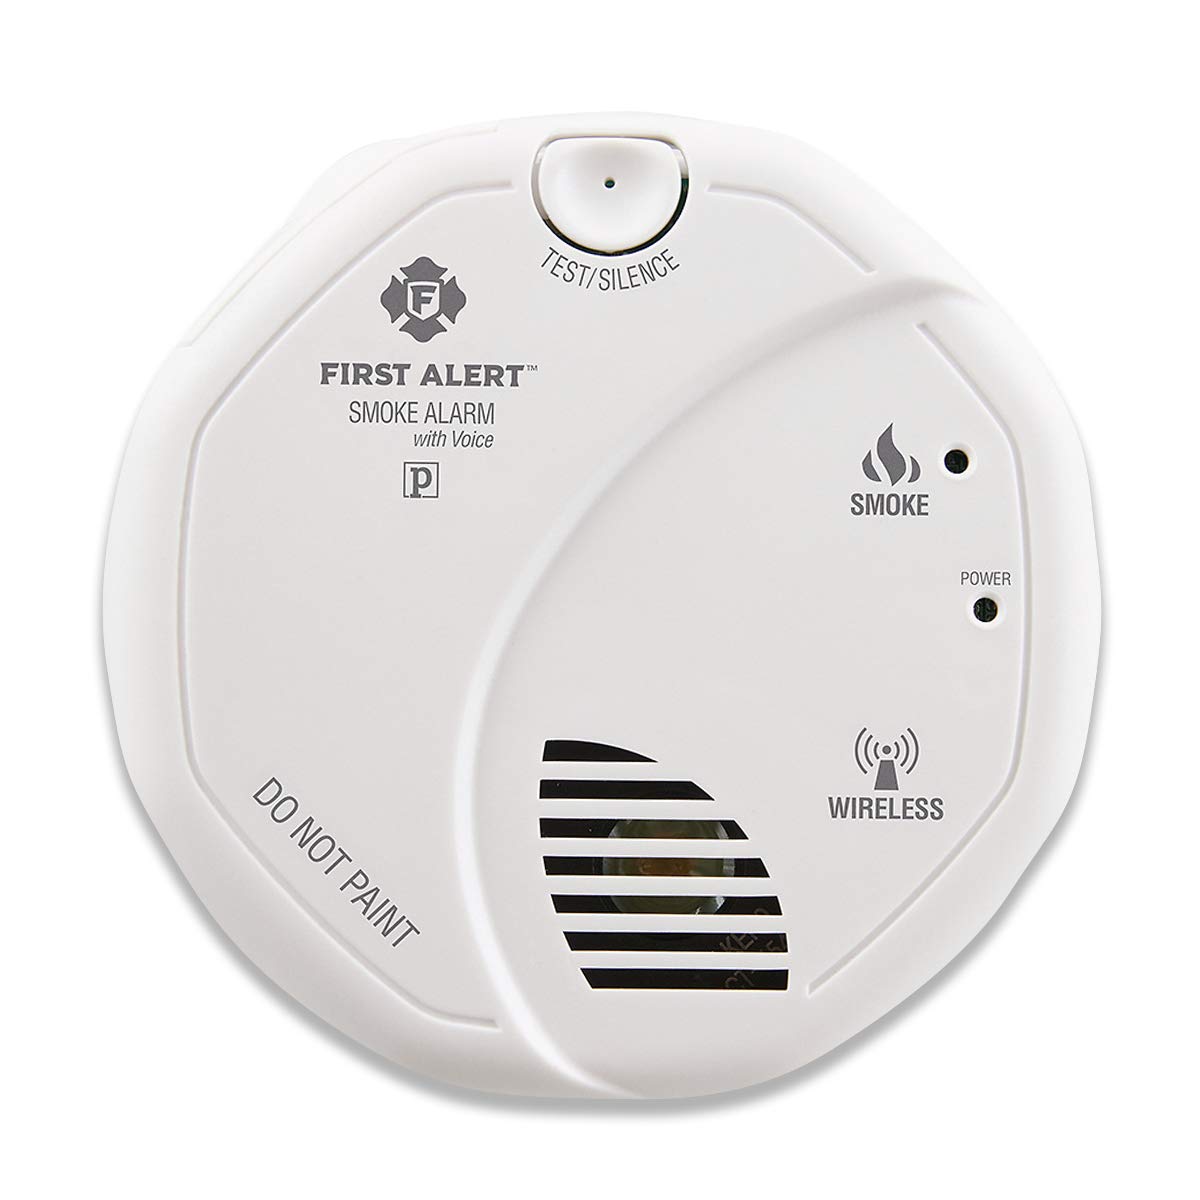 First Alert SA511CN2-3ST Interconnected Wireless Smoke Alarm with Voice Location, 2-Pack - image 1 of 9